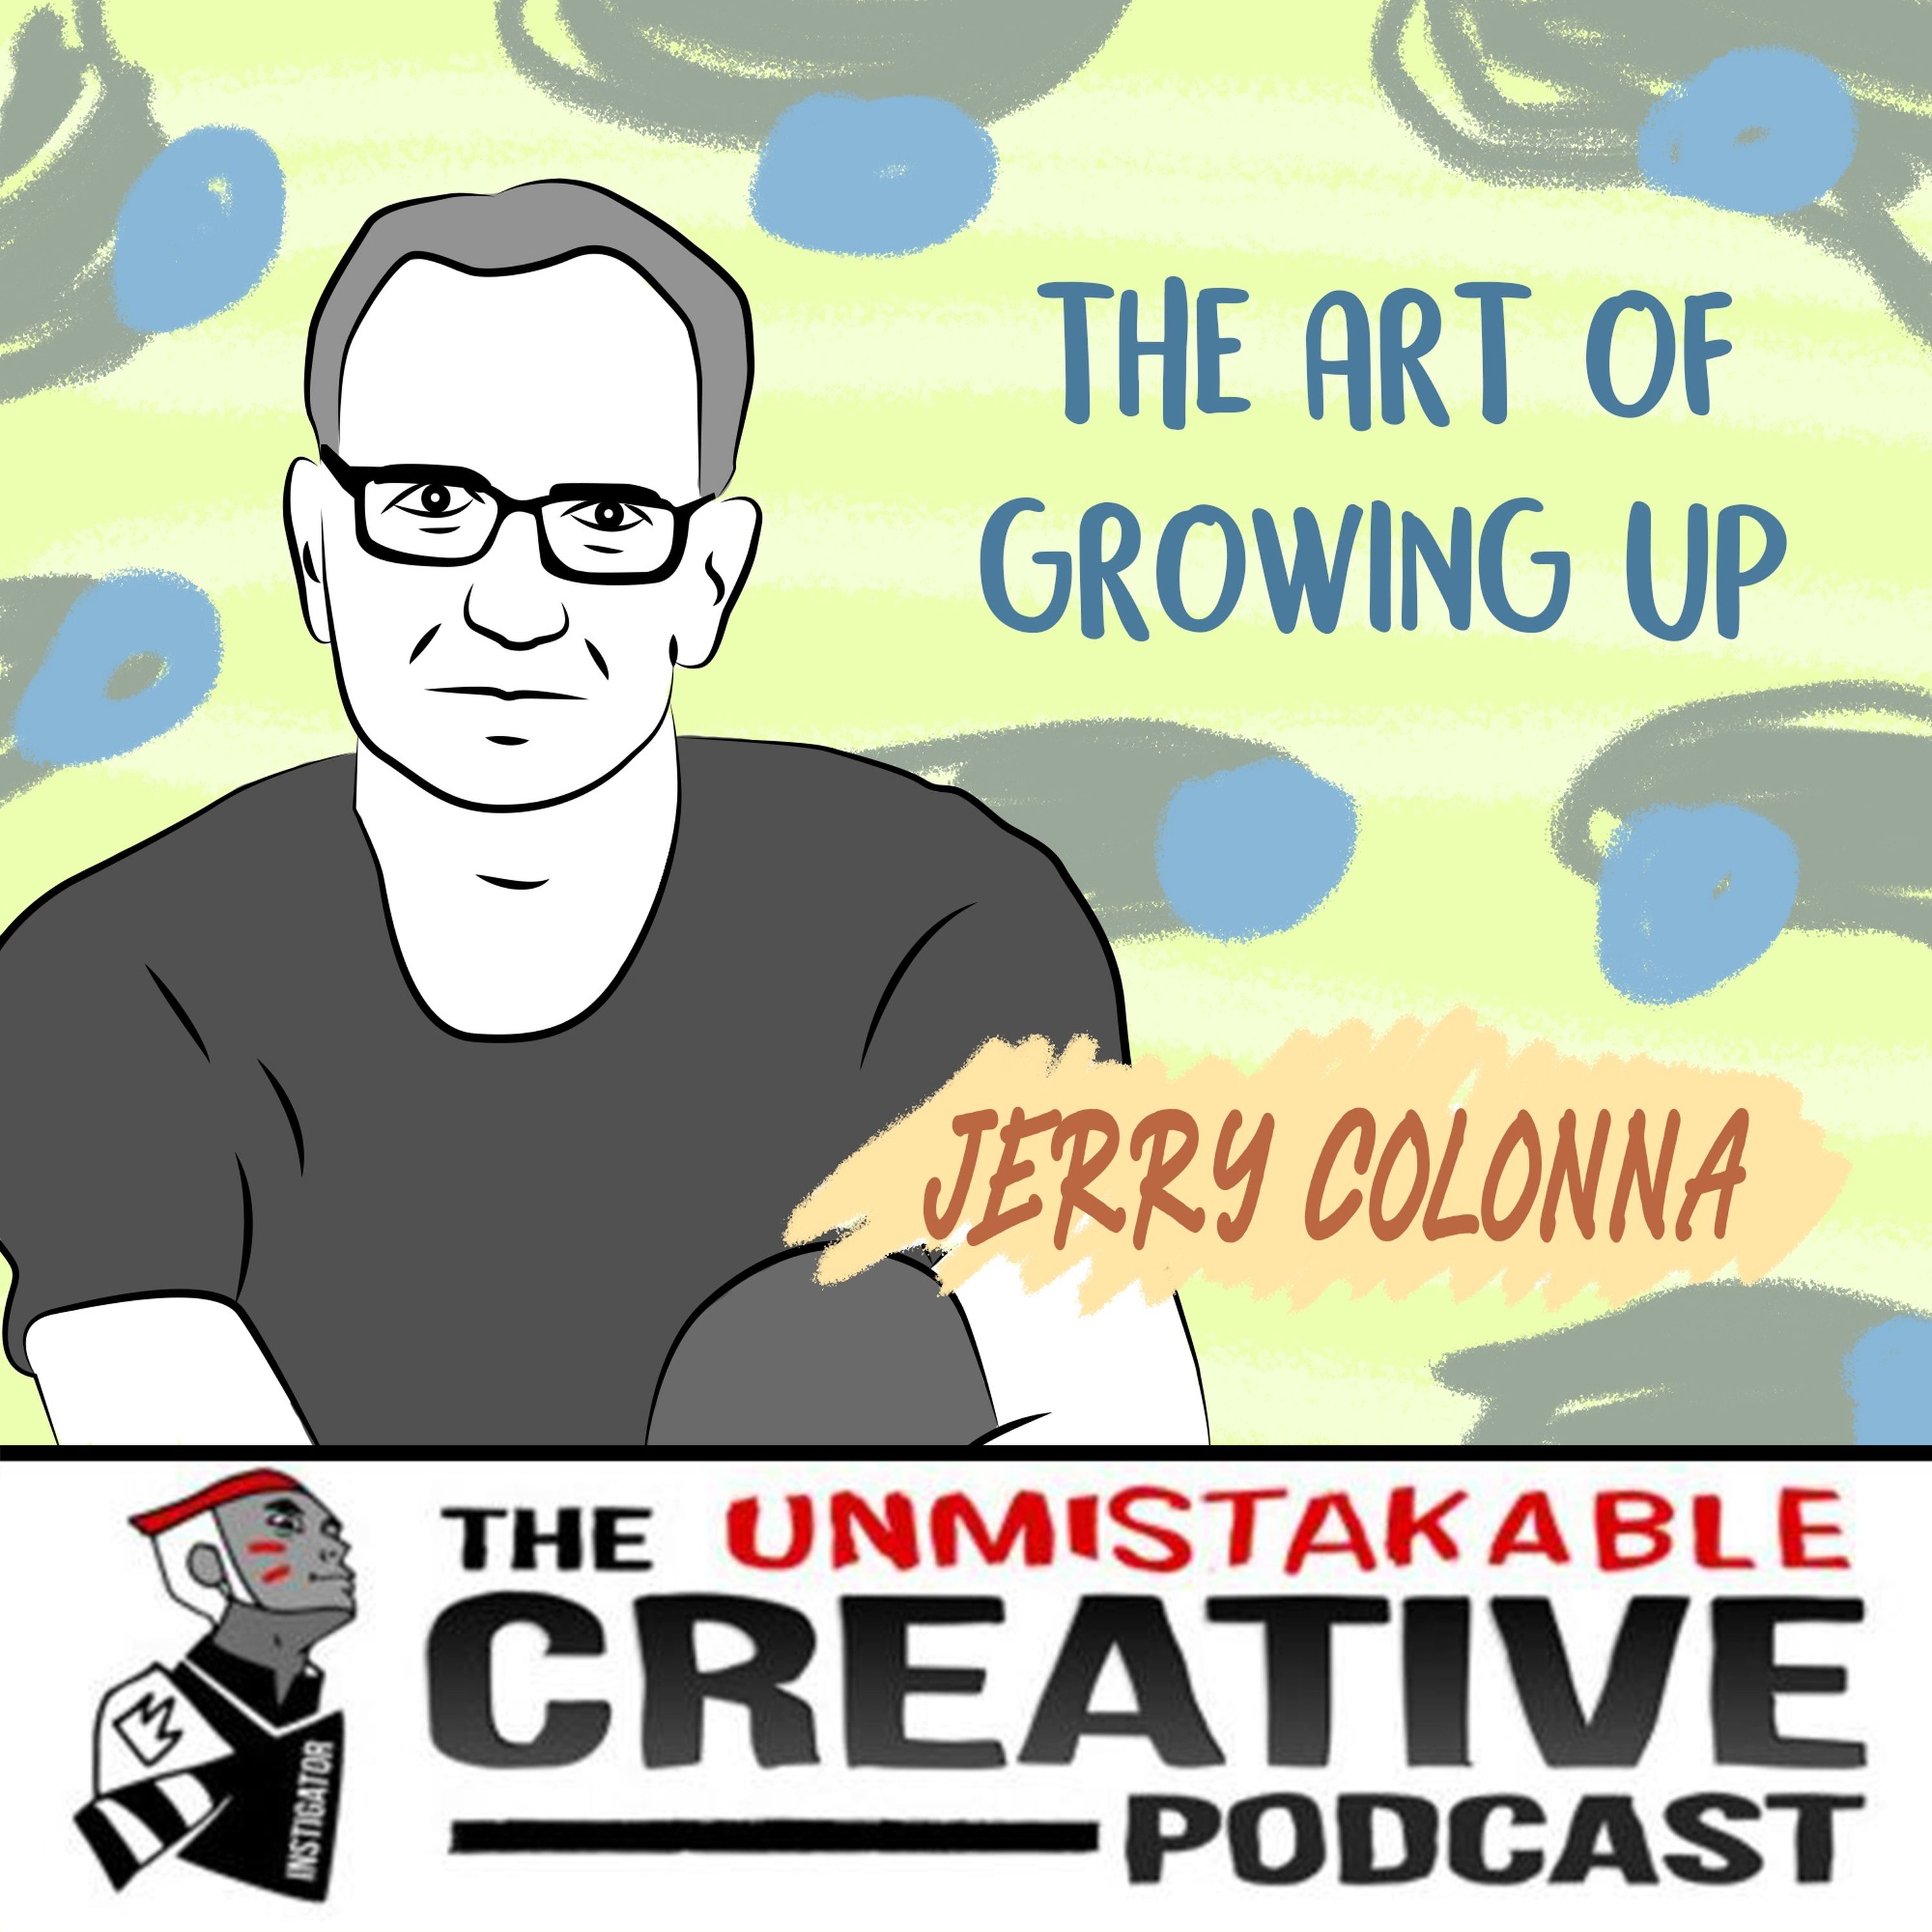 The Art of Growing Up with Jerry Colonna